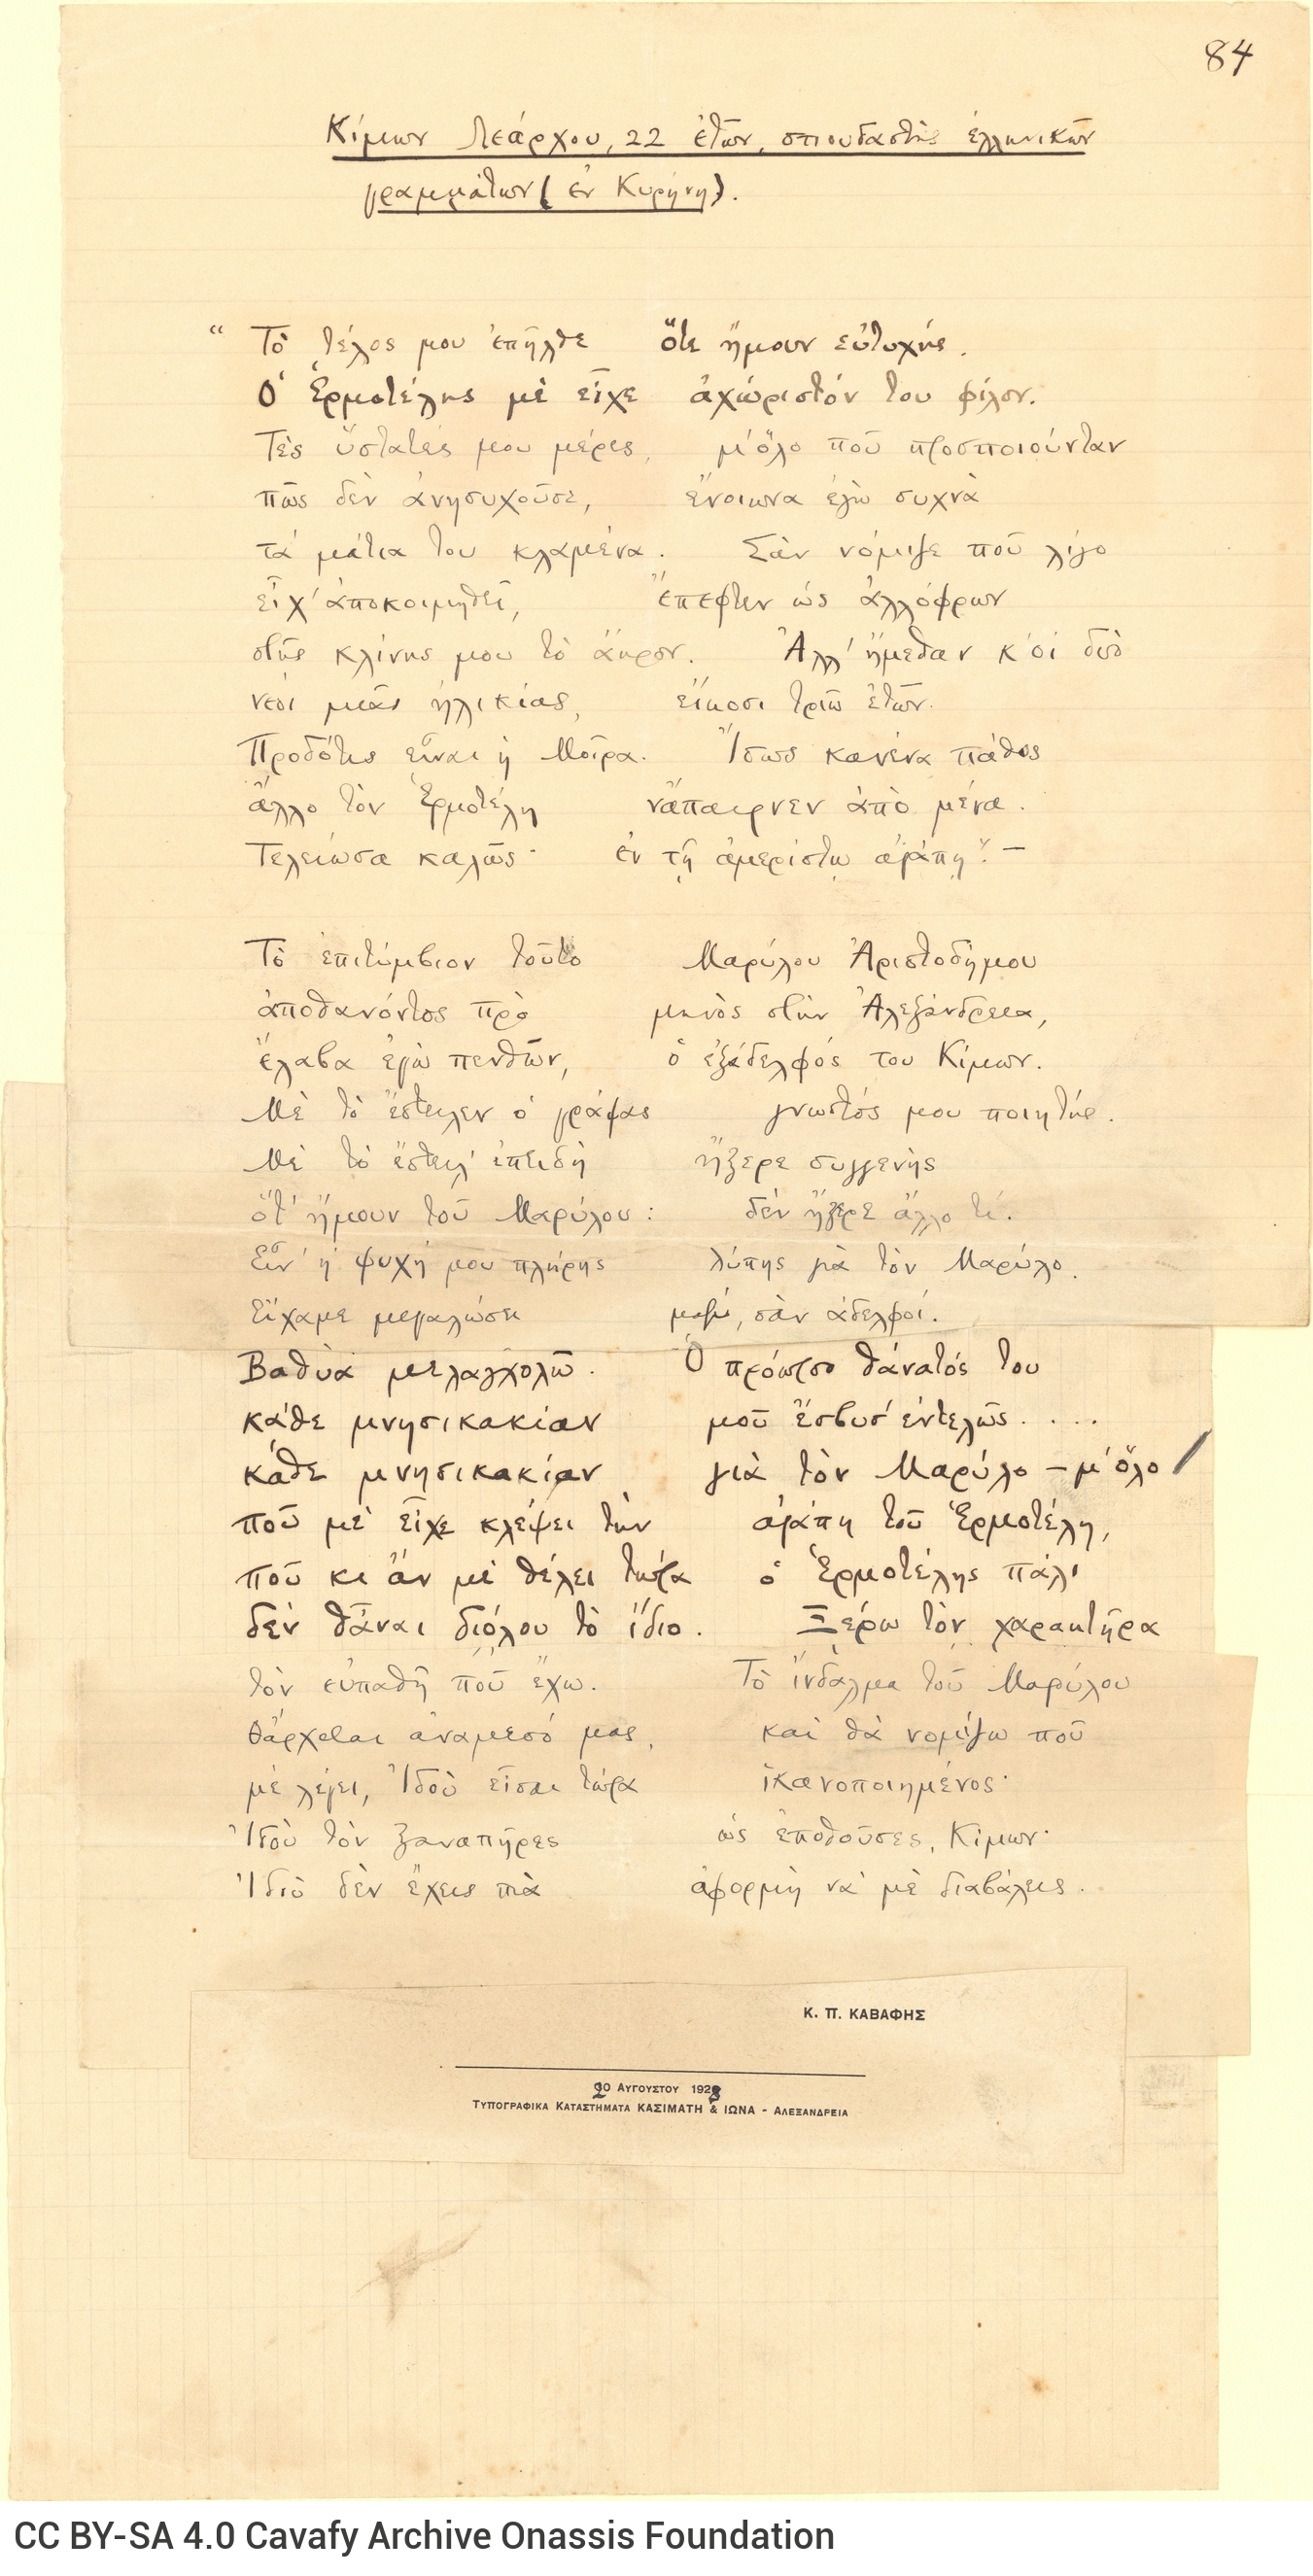 Manuscript of the poem "Cimon Son of Learchus, 22 Years Old, Teacher of Greek Letters (in Cyrene)", on a sheet consisting 